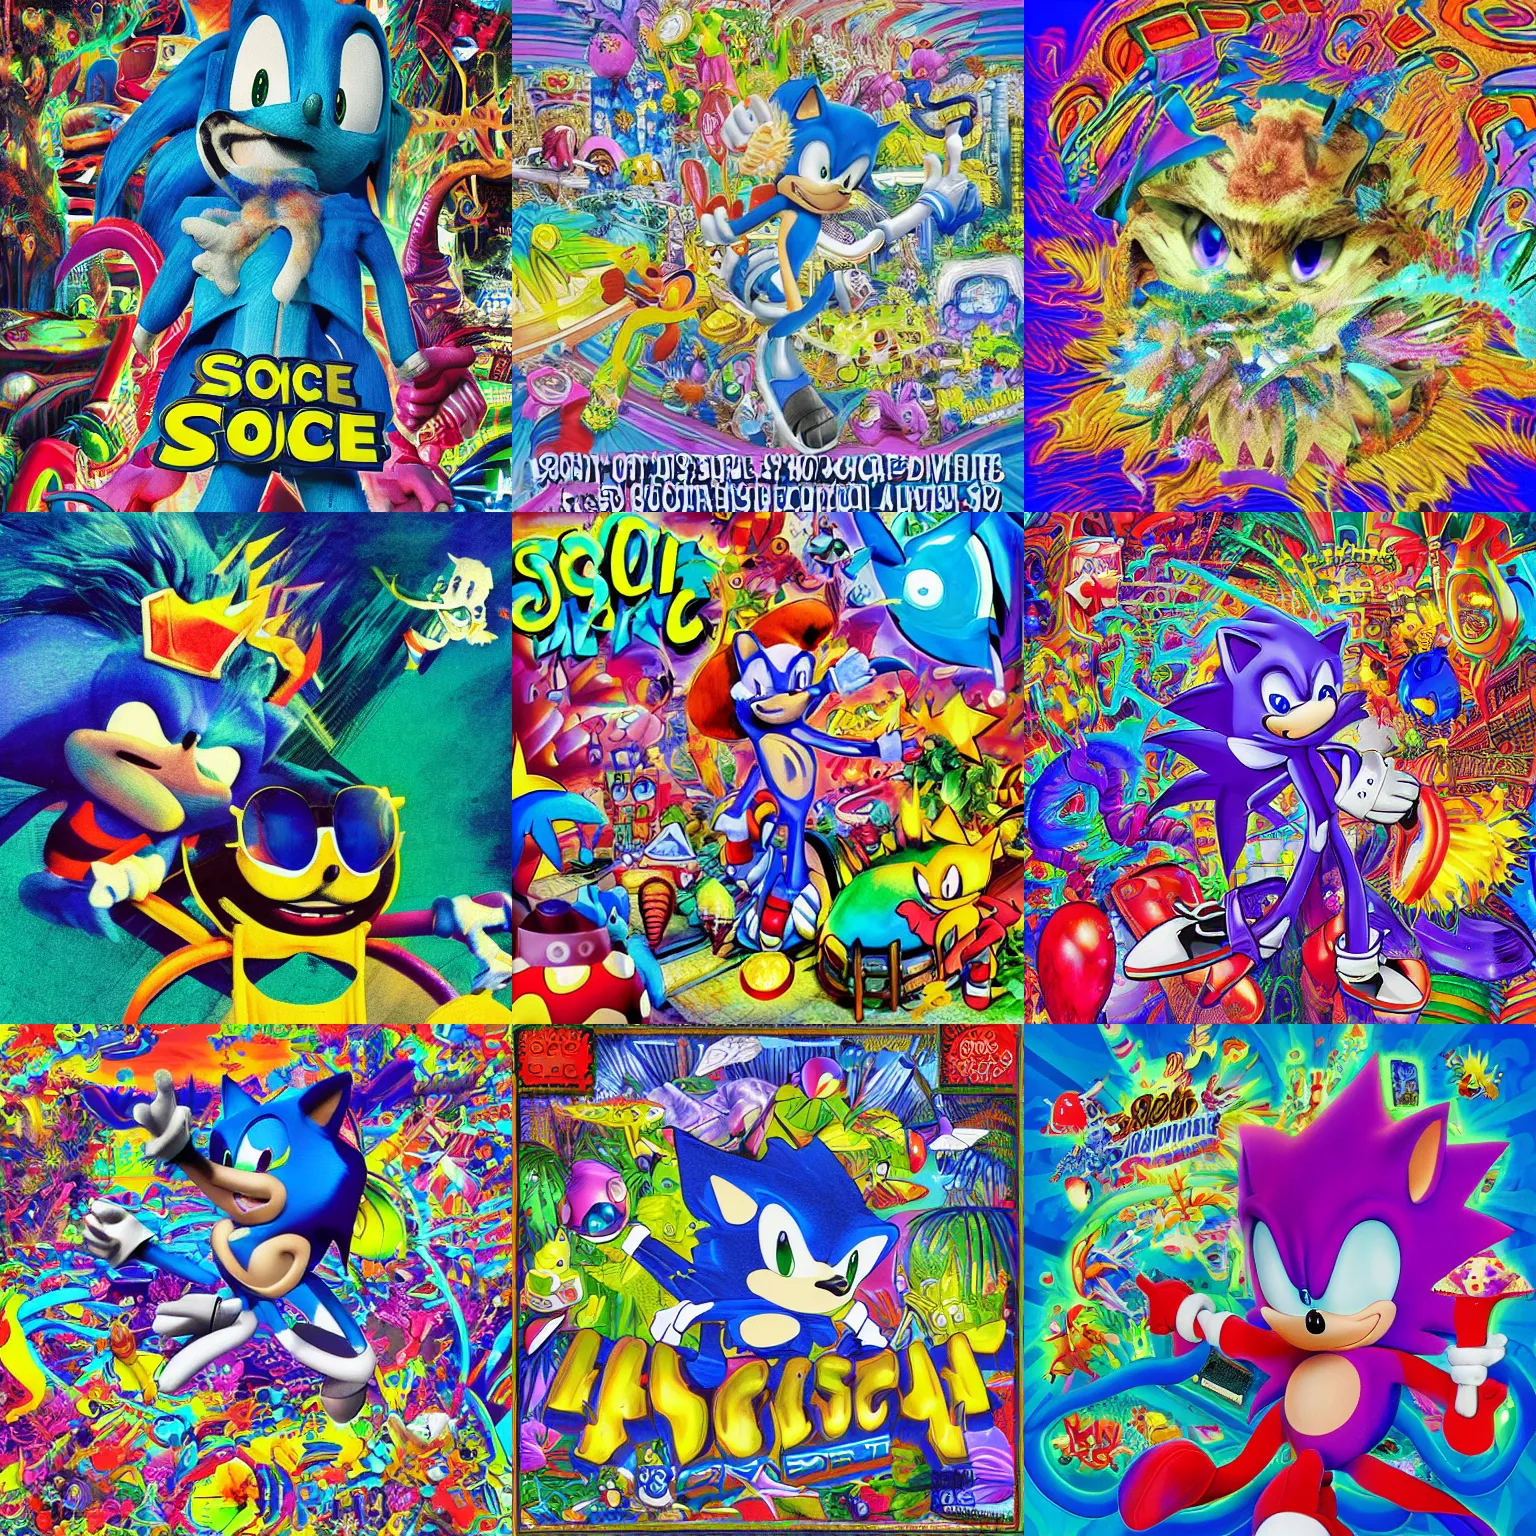 Prompt: surreal, sonic mascot, sharp, deepdream detailed professional, high quality airbrush art MGMT album cover of a liquid dissolving LSD DMT blue sonic the hedgehog surrounded by 1980s kitsch products, tropical ocean, purple checkerboard background, 1980s 1985 arcade video game album cover